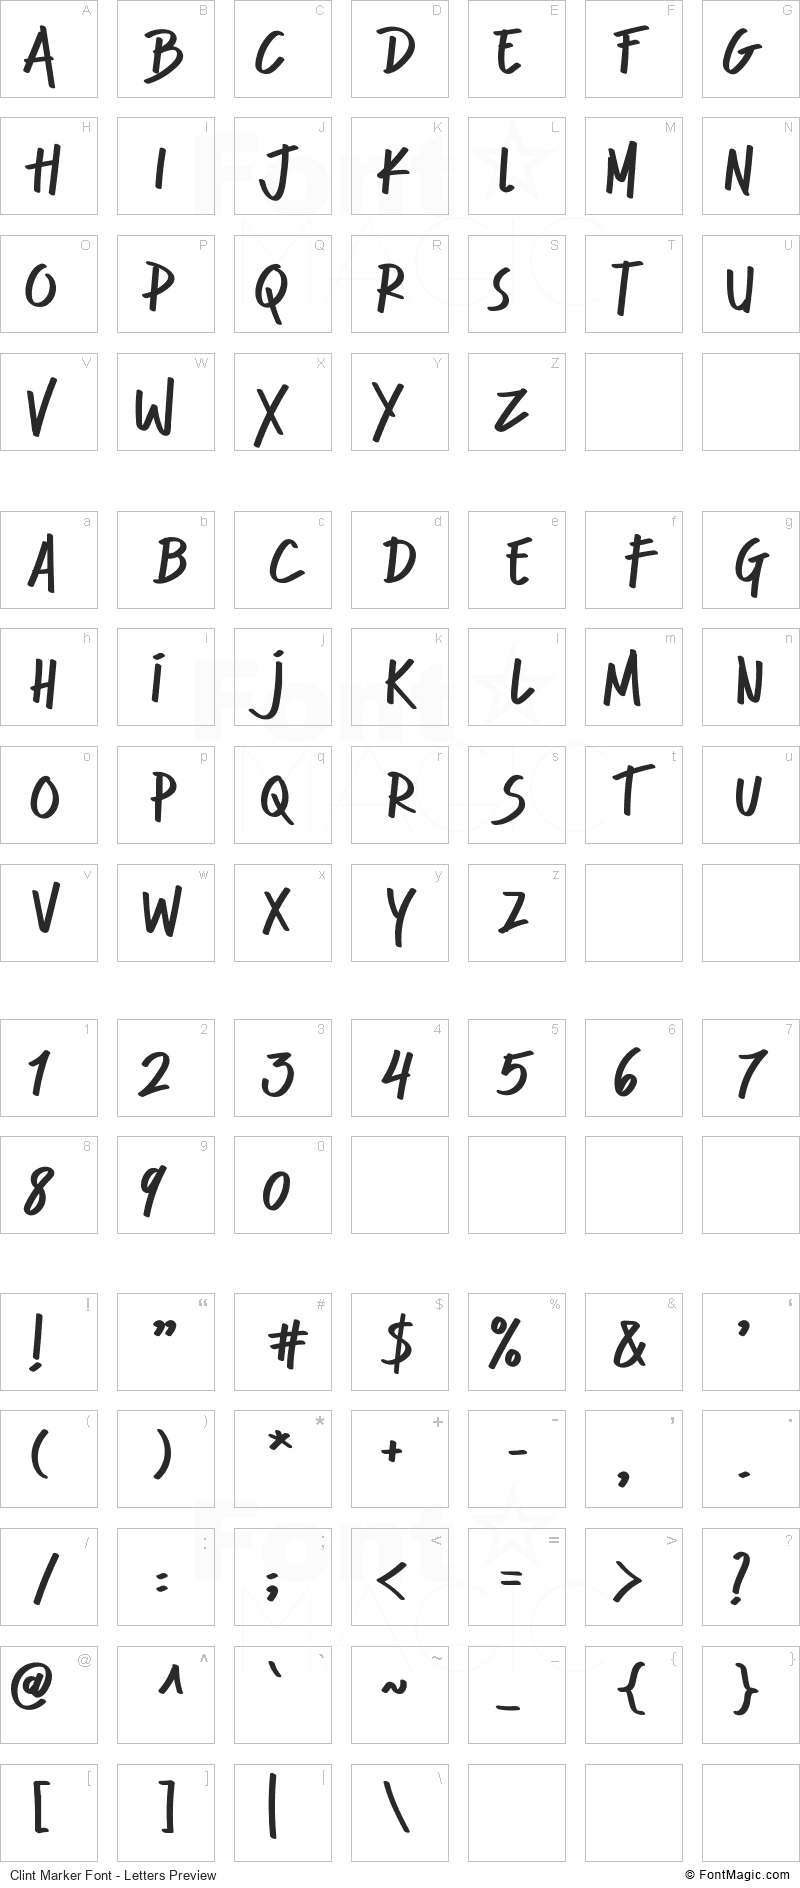 Clint Marker Font - All Latters Preview Chart